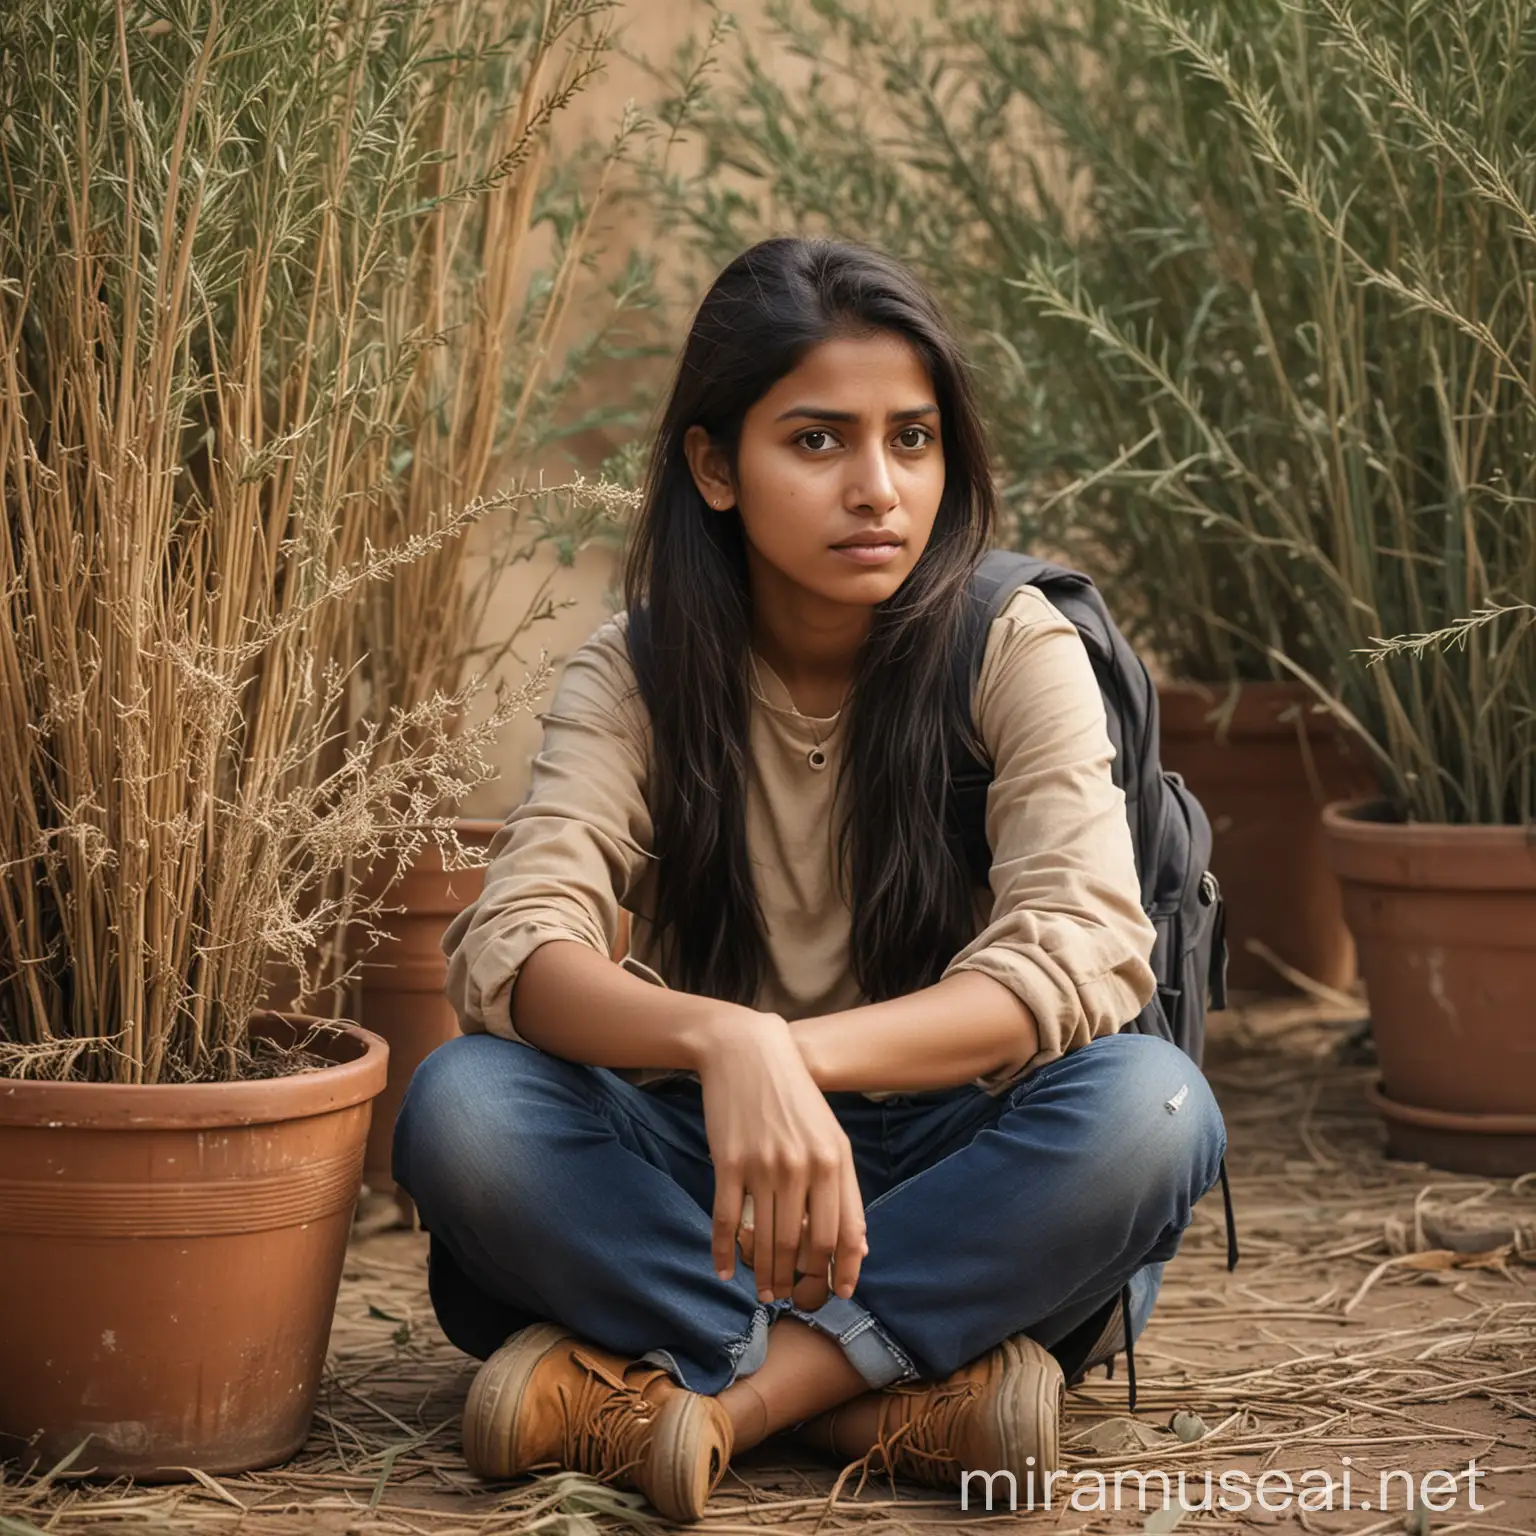 a young indian woman sitting with a backpack beside a dried plant in a pot. Her facial expression is sad, the picture is shot with a Canon EOS DSLR under natural lighting